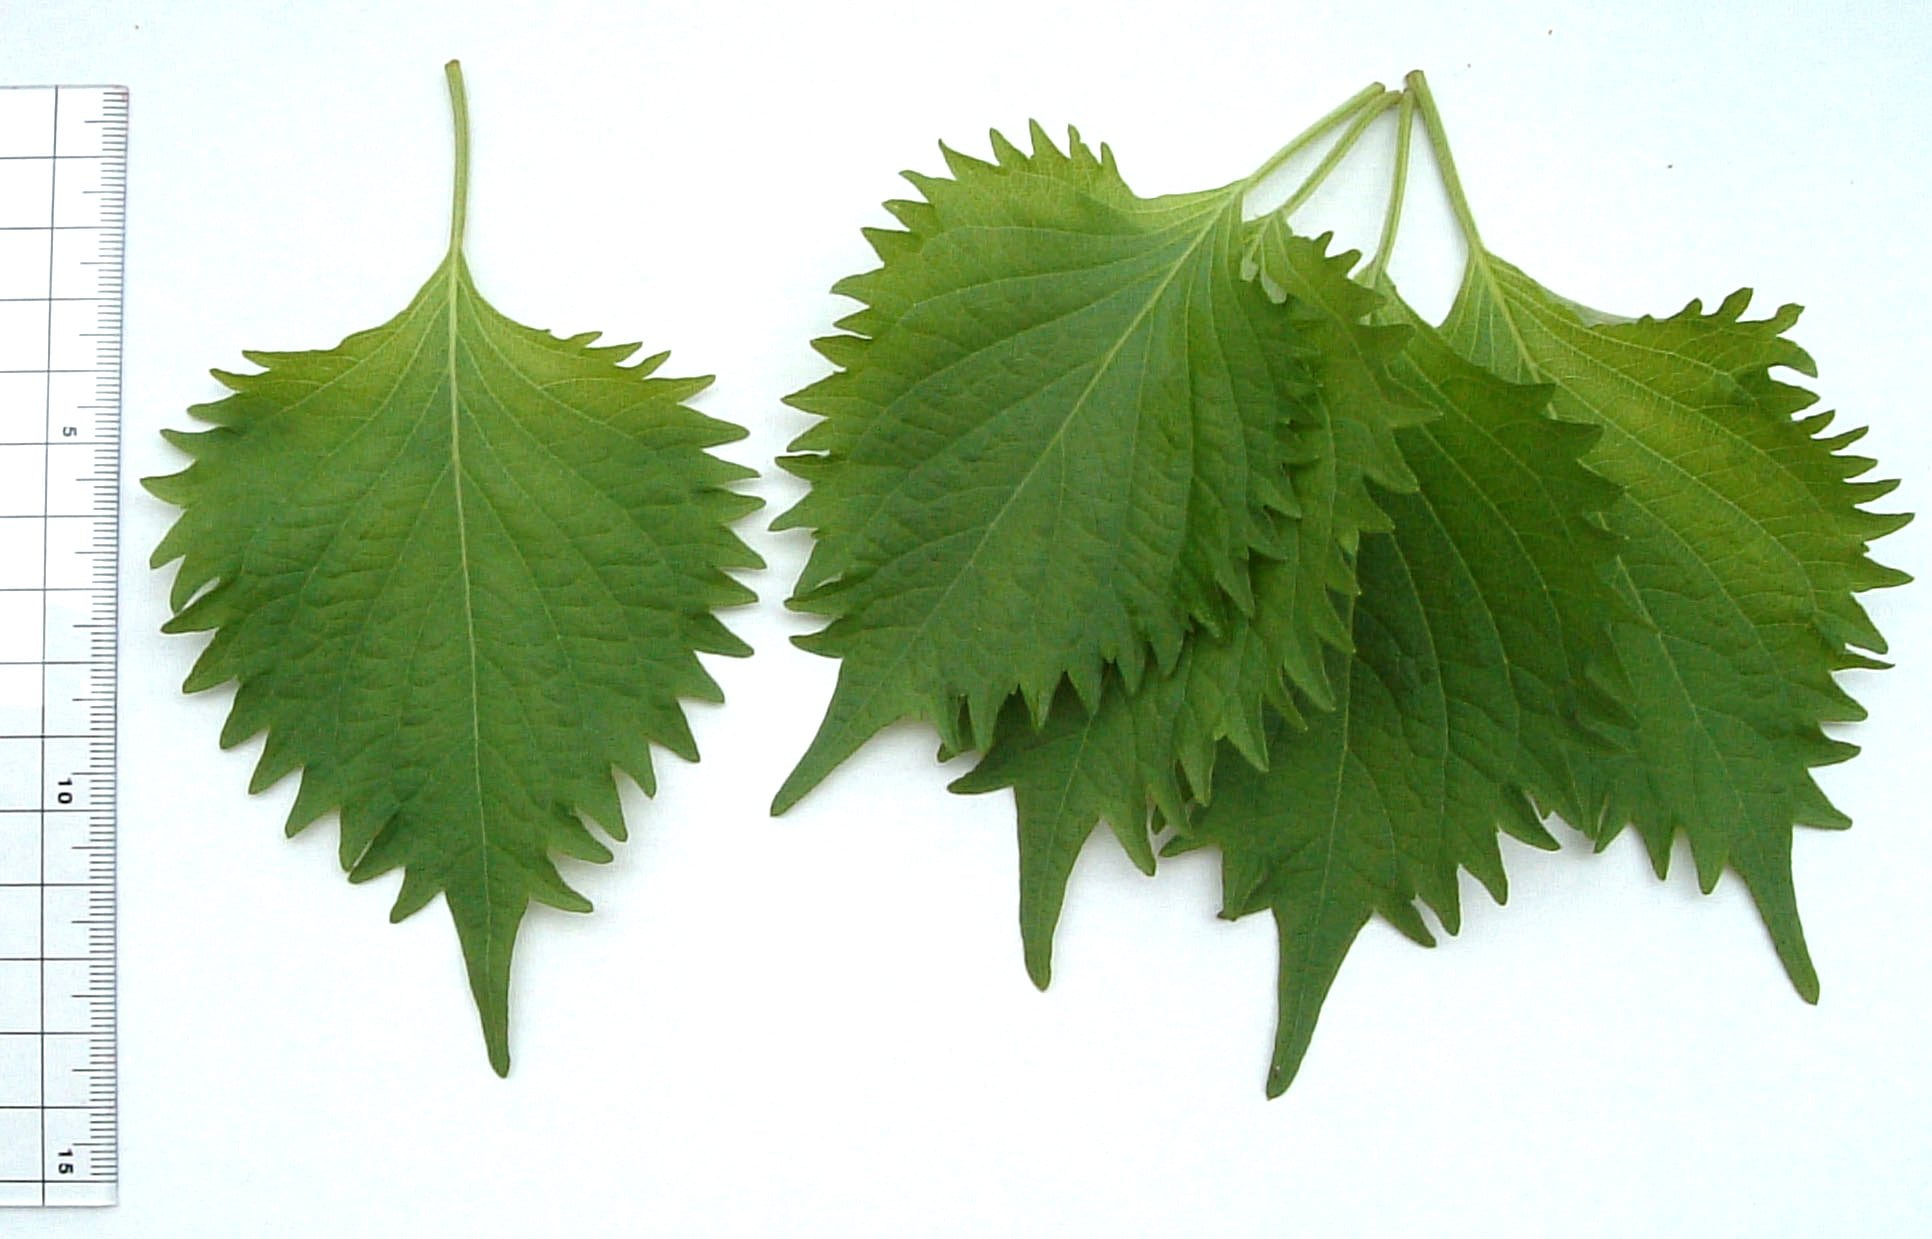 Three green grapevine leaves of different sizes spread out next to a ruler for scale on a white background.